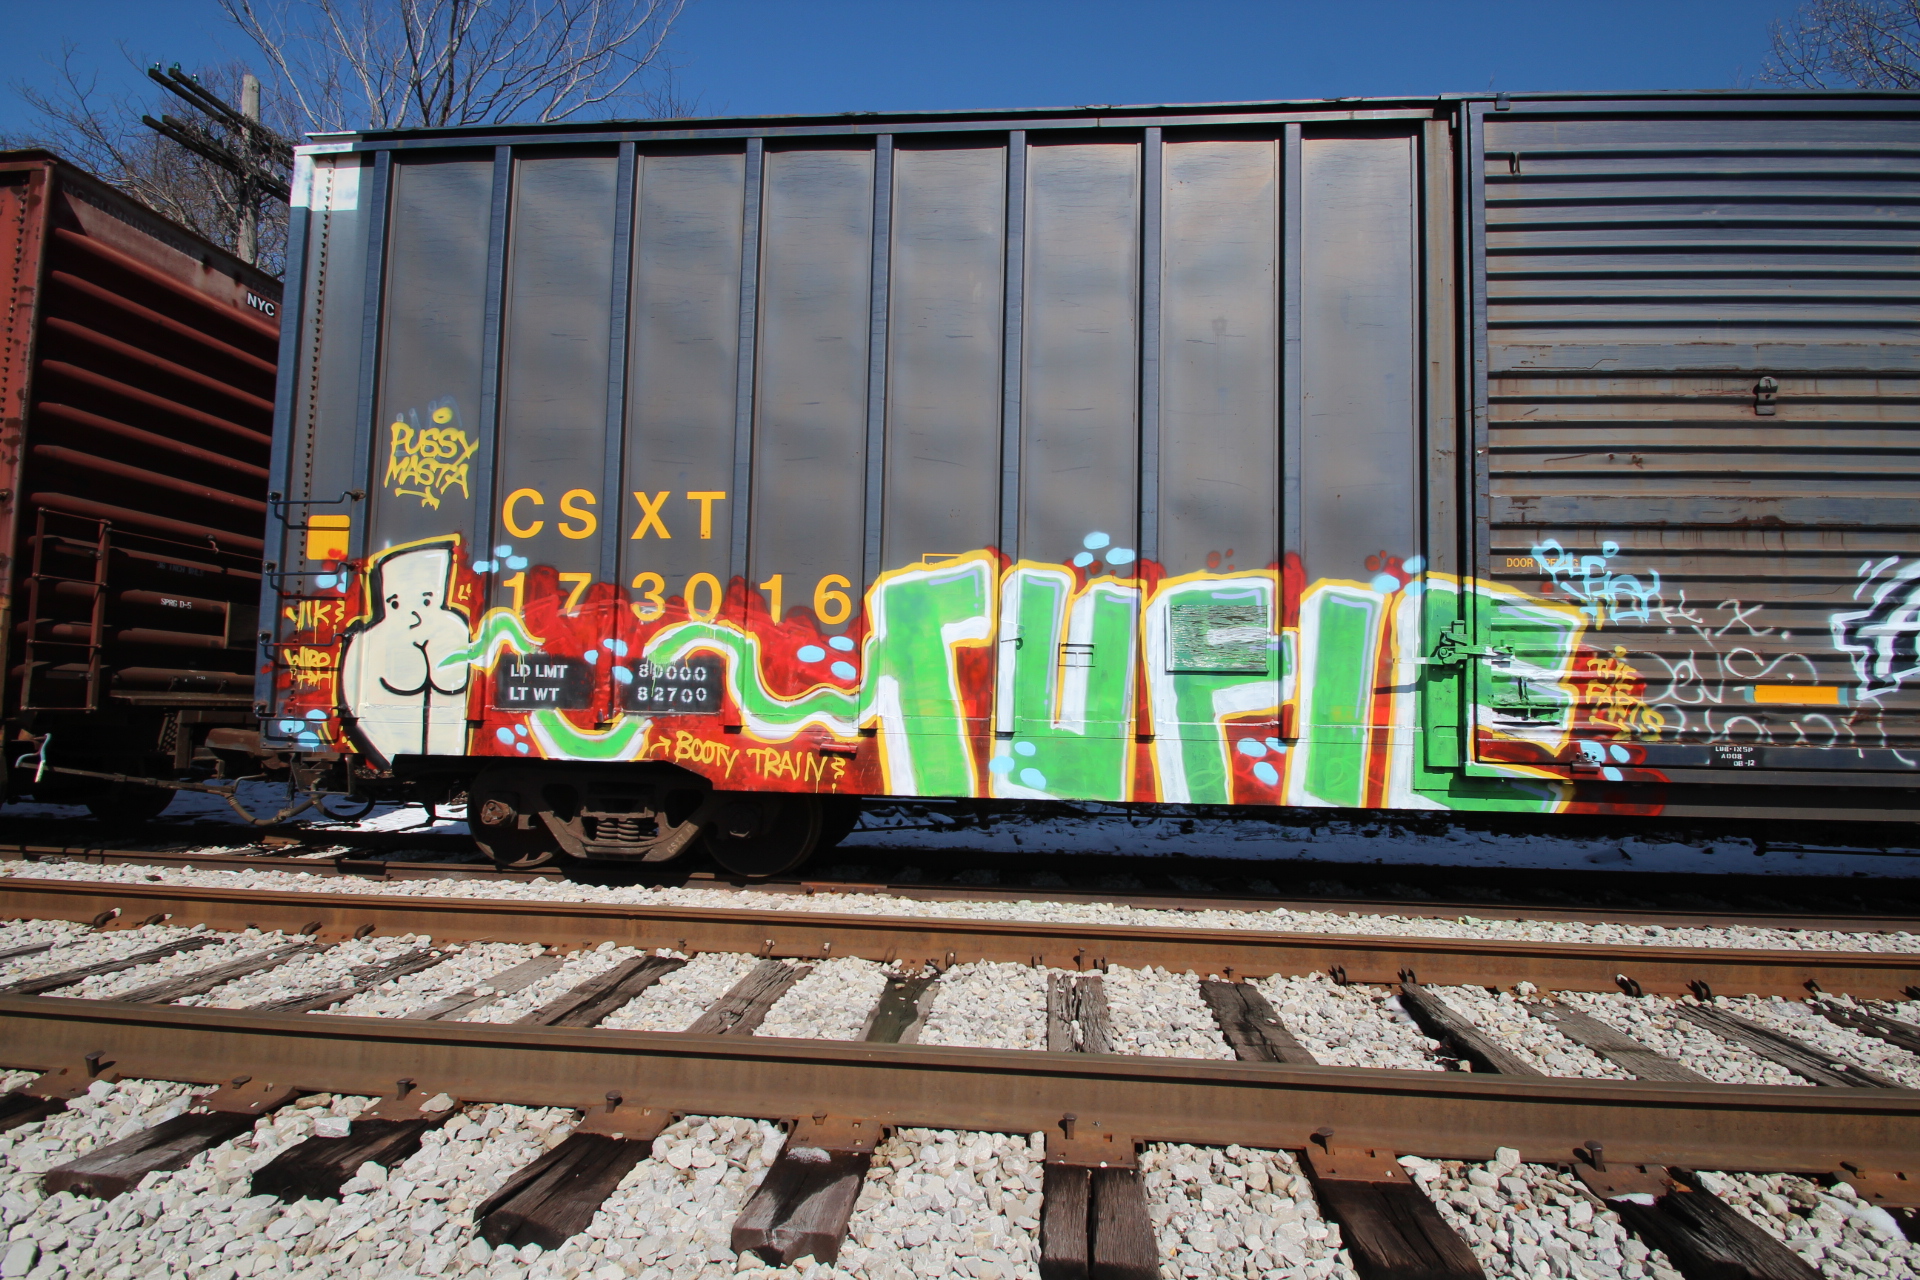 an image of a cargo car with colorful graffiti